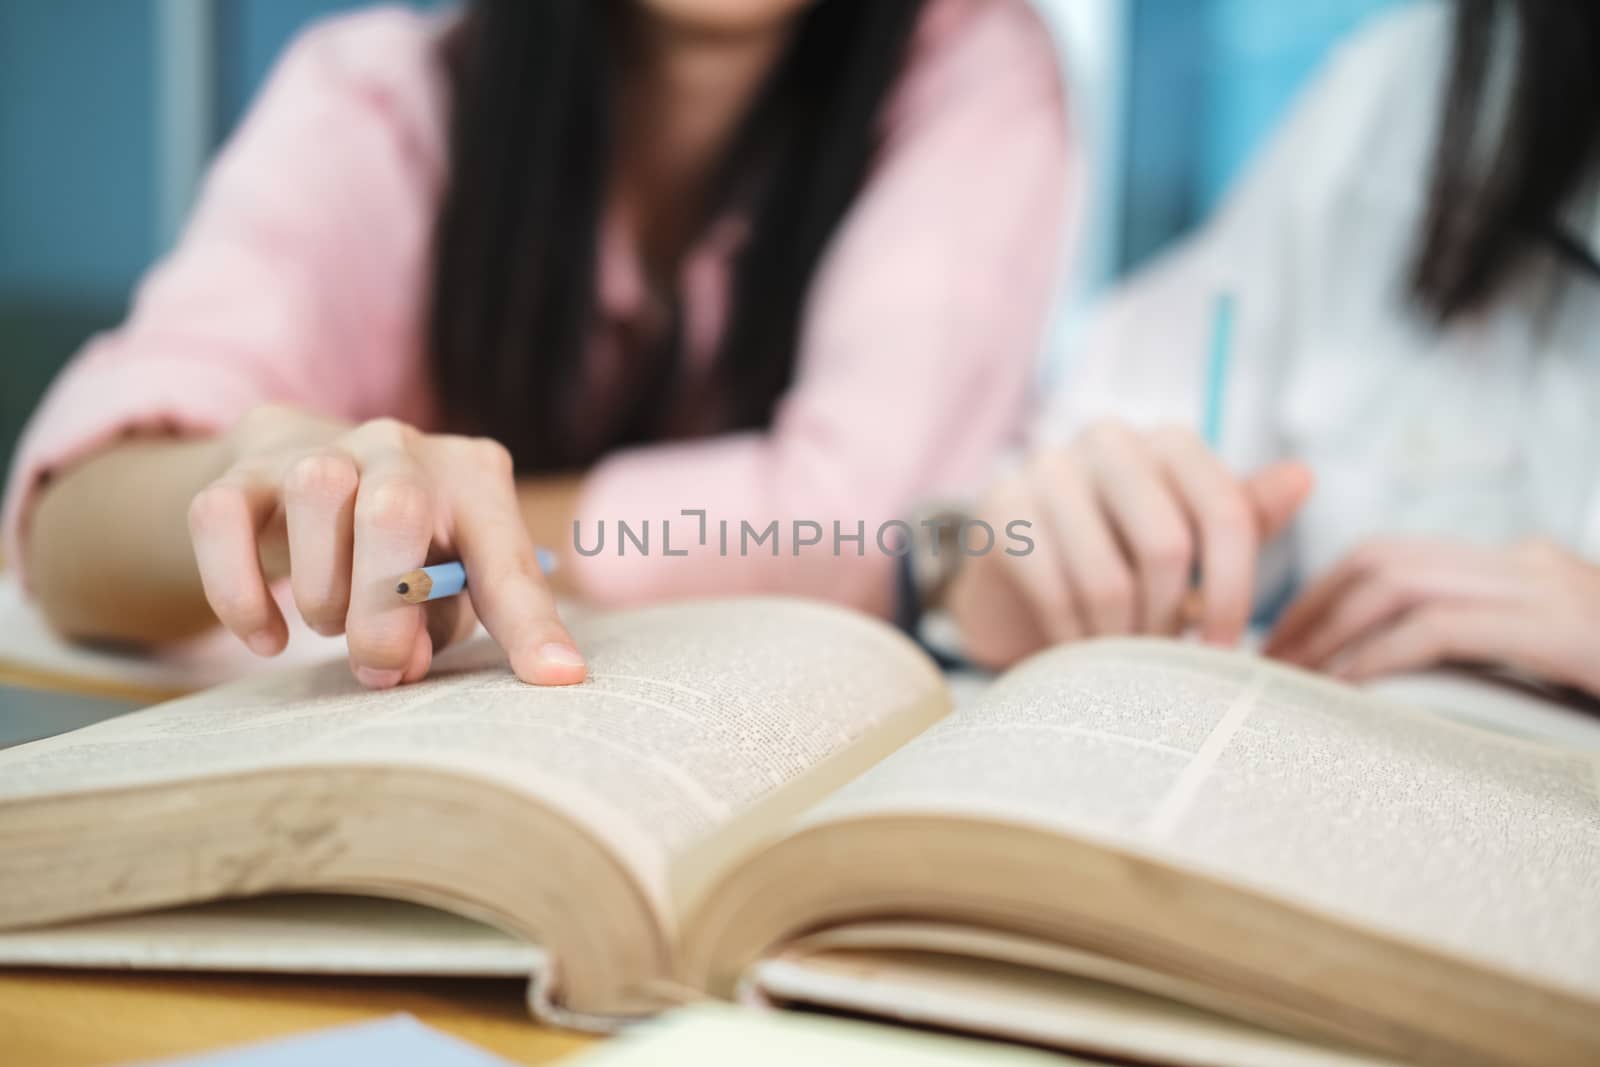 Learning, education and school concept. Young woman and man studying for a test or an exam. Tutor books with friends. Young students campus helps friend catching up and learning.